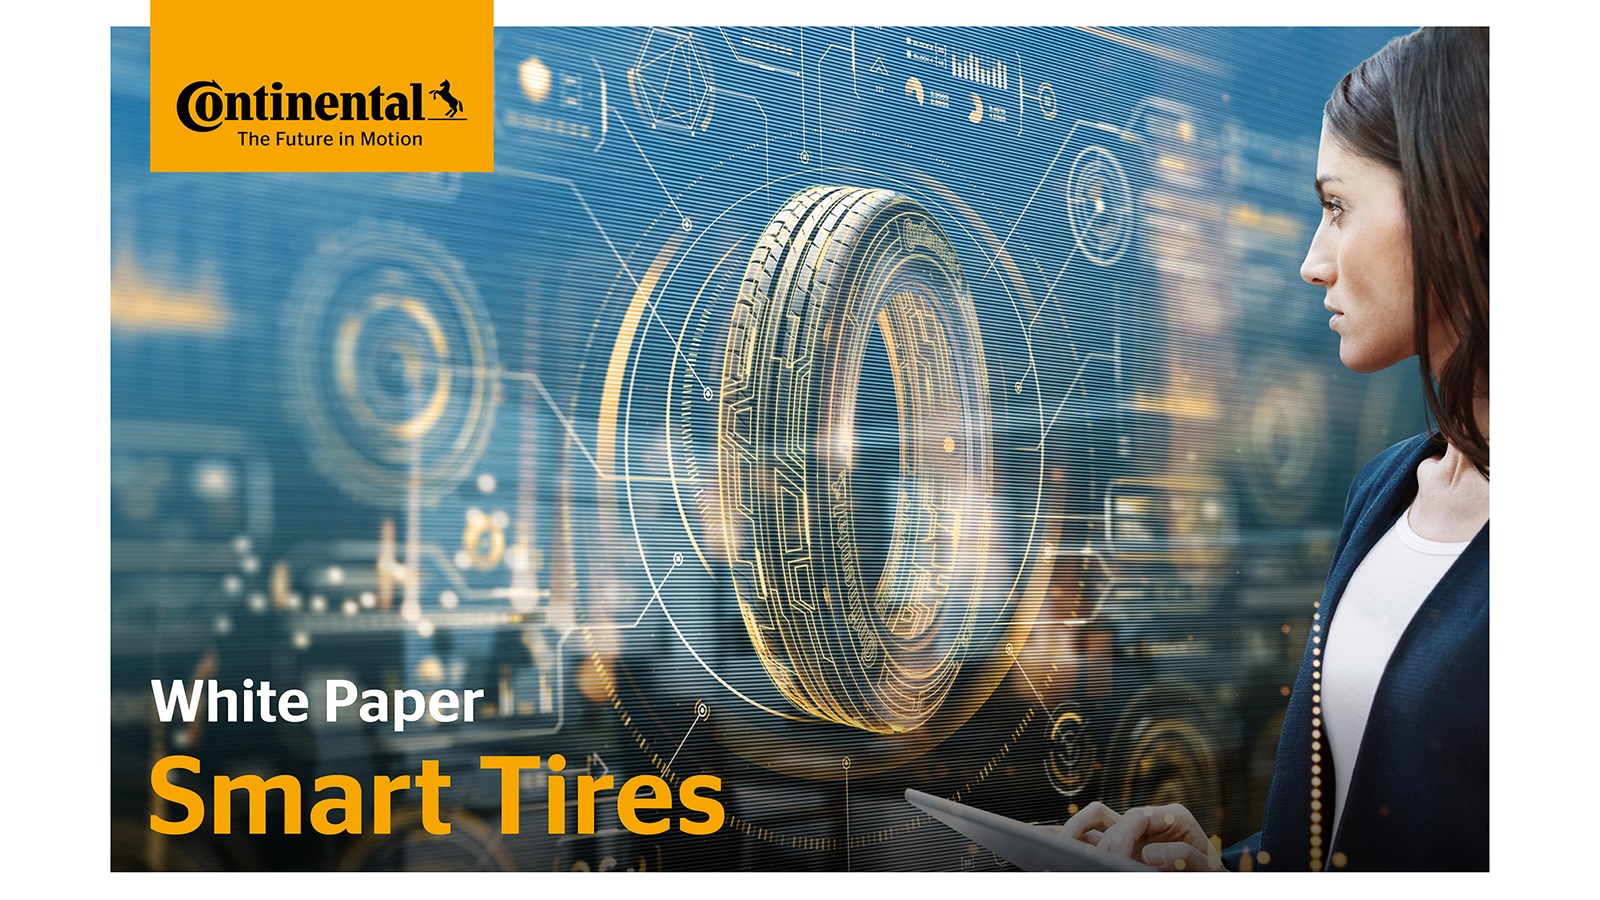 The optimum solution is in the detail – smart tyres that increase efficiency